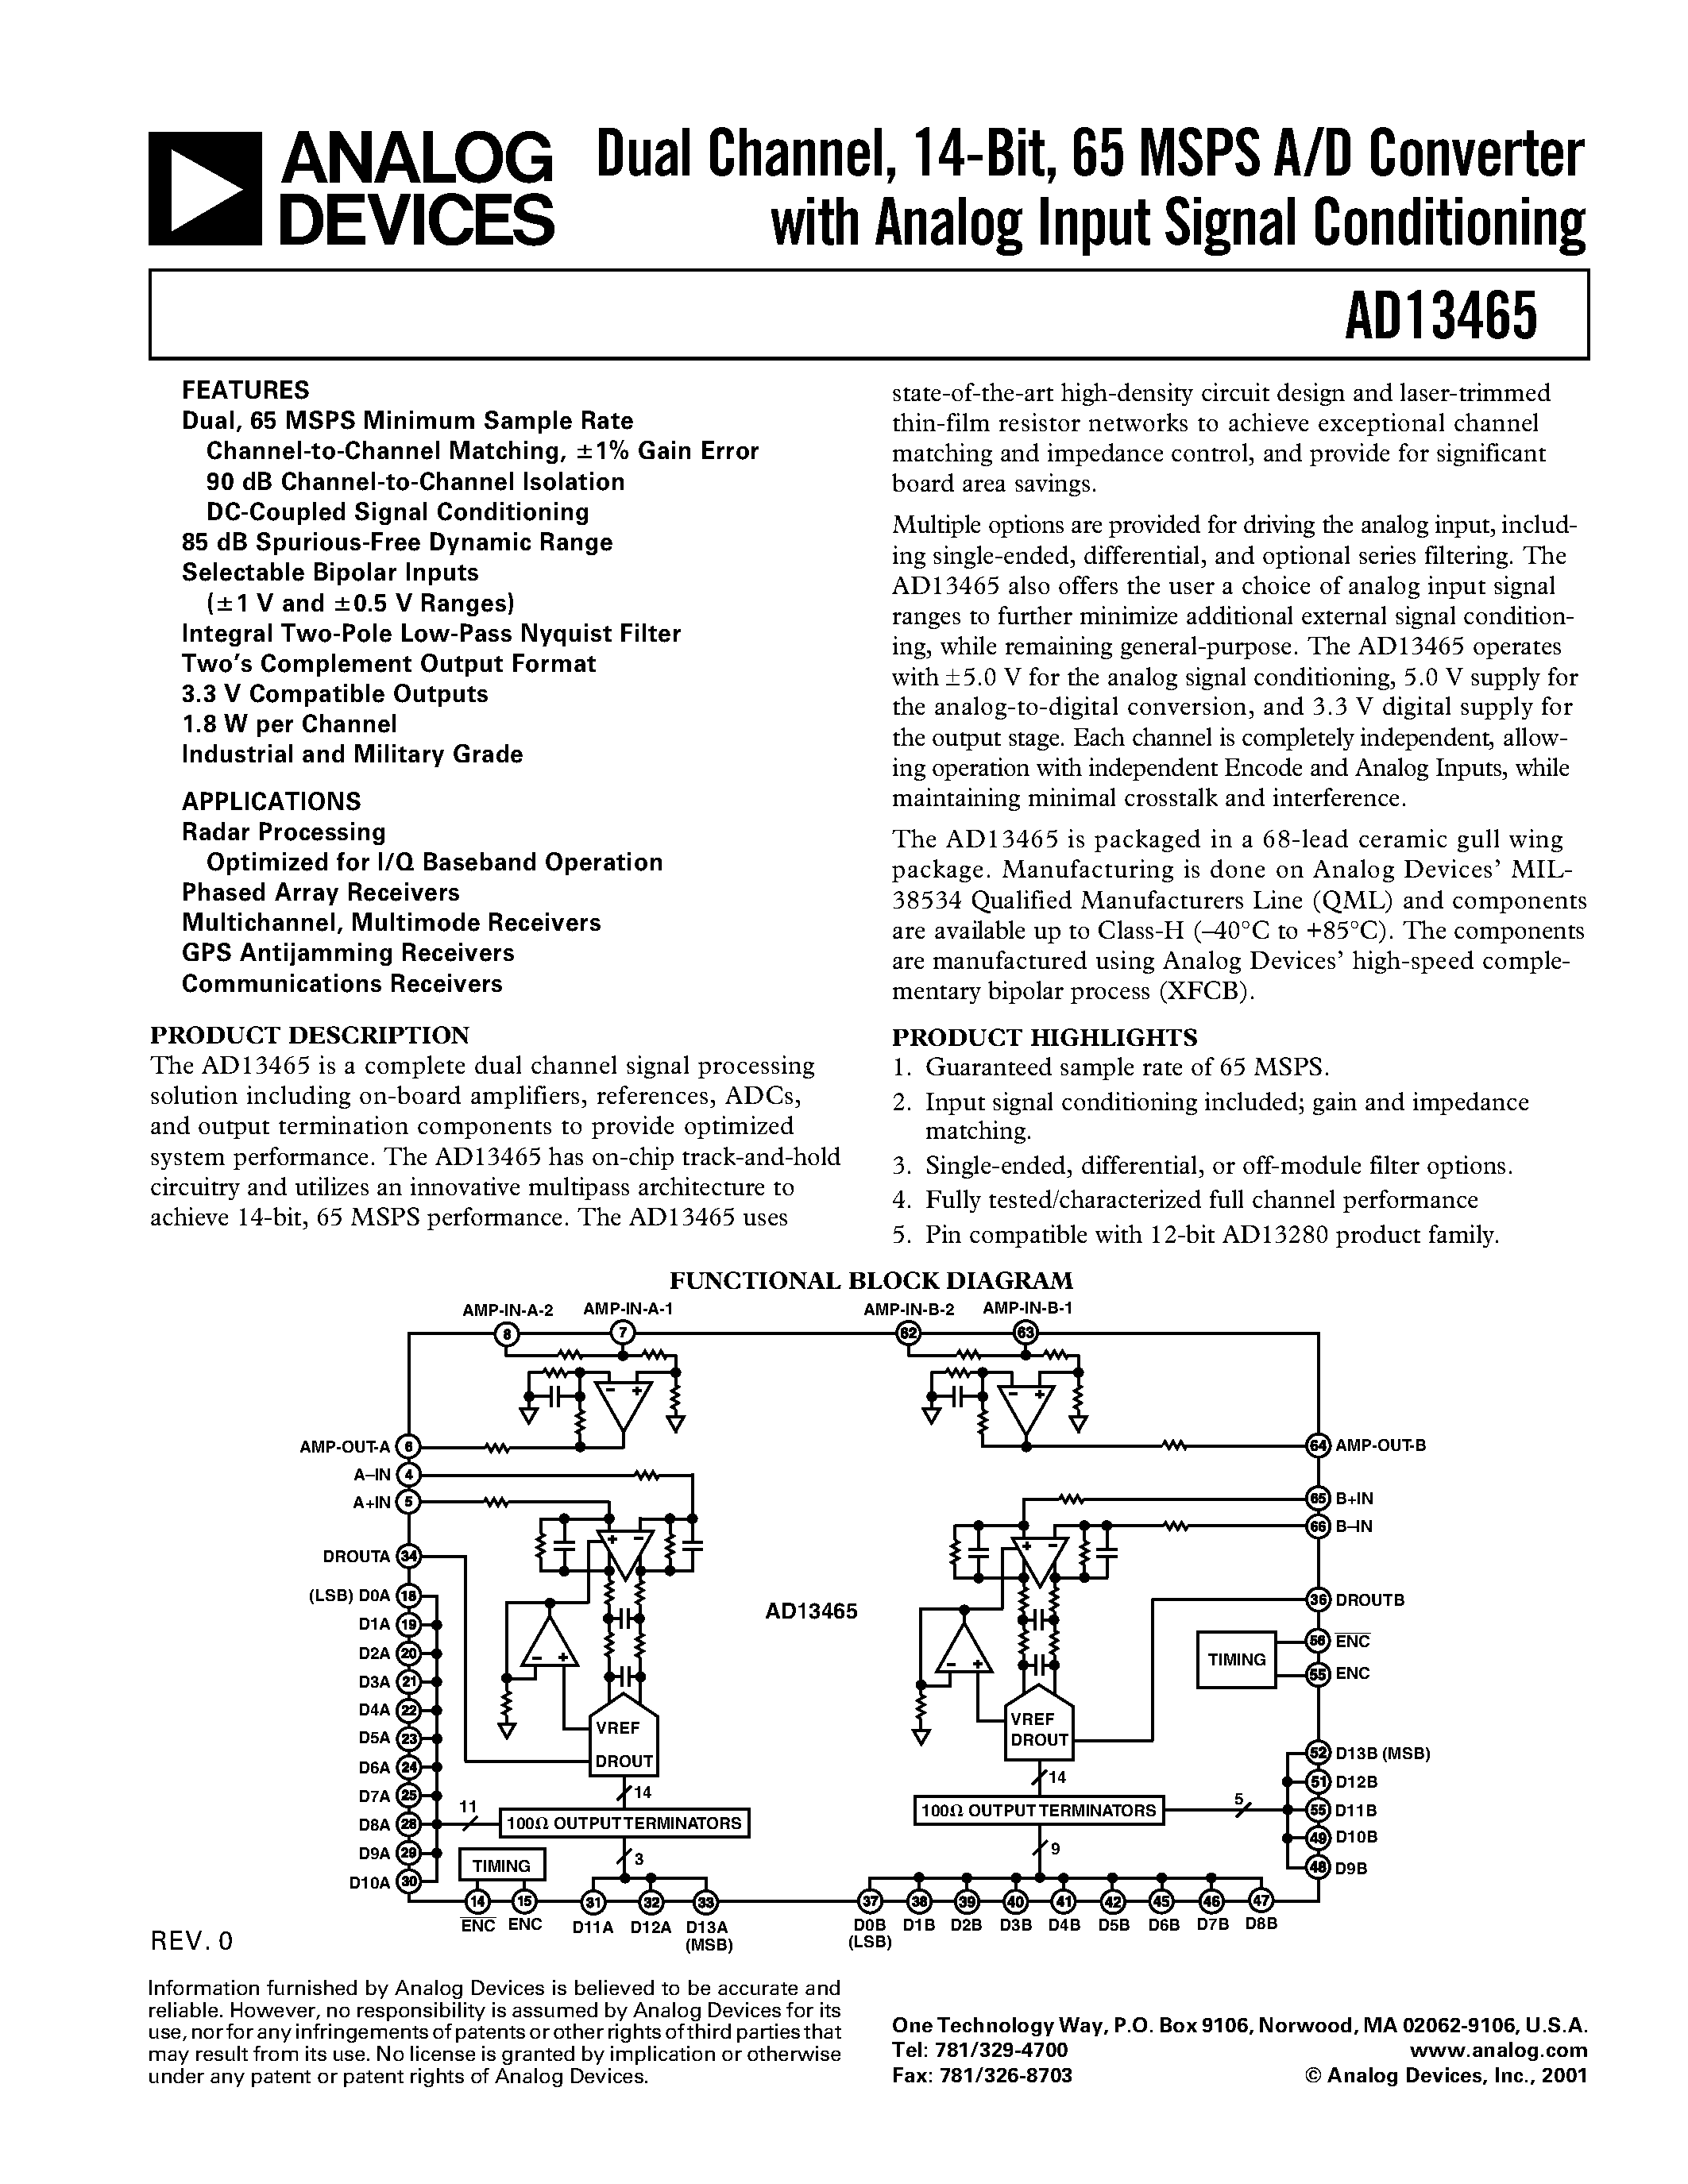 Datasheet AD13465BZ - Dual Channel/ 14-Bit/ 65 MSPS A/D Converter with Analog Input Signal Conditioning page 1